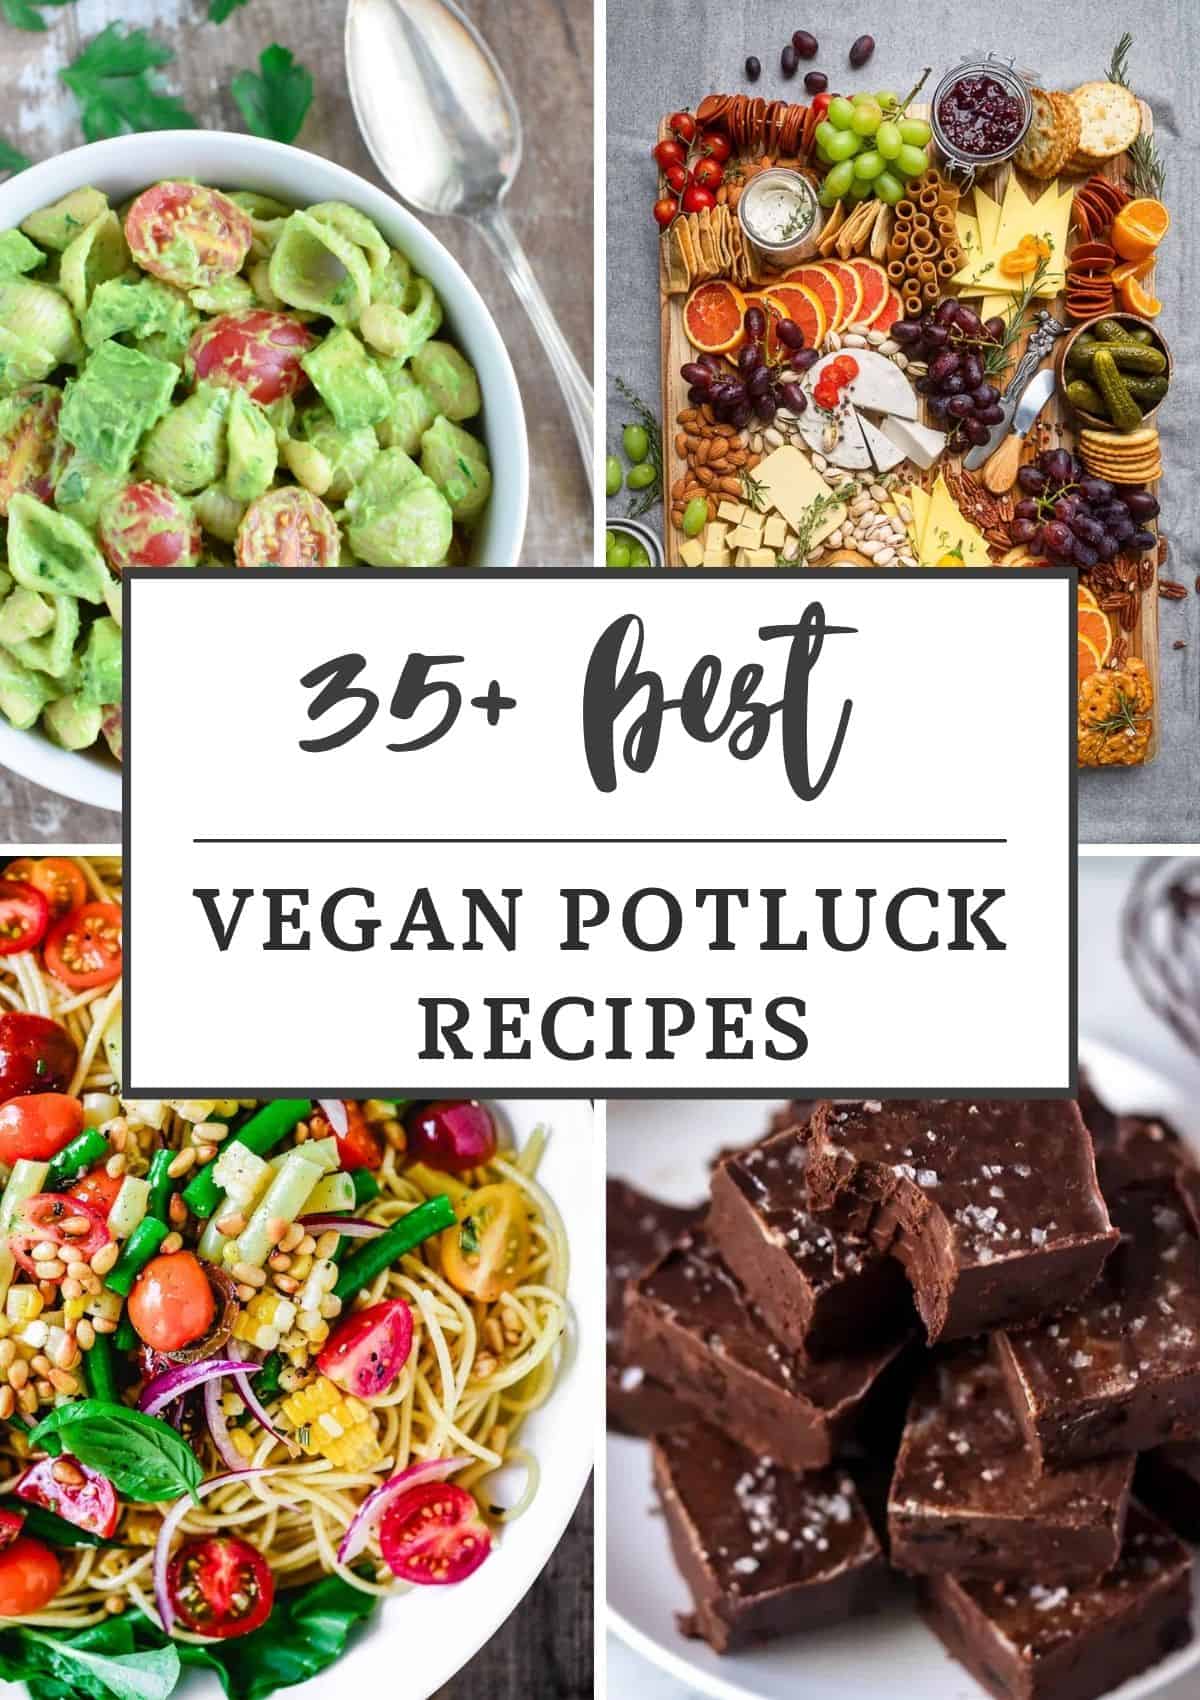 collage of 4 of the recipes from the vegan potluck roundup with text title overlay.